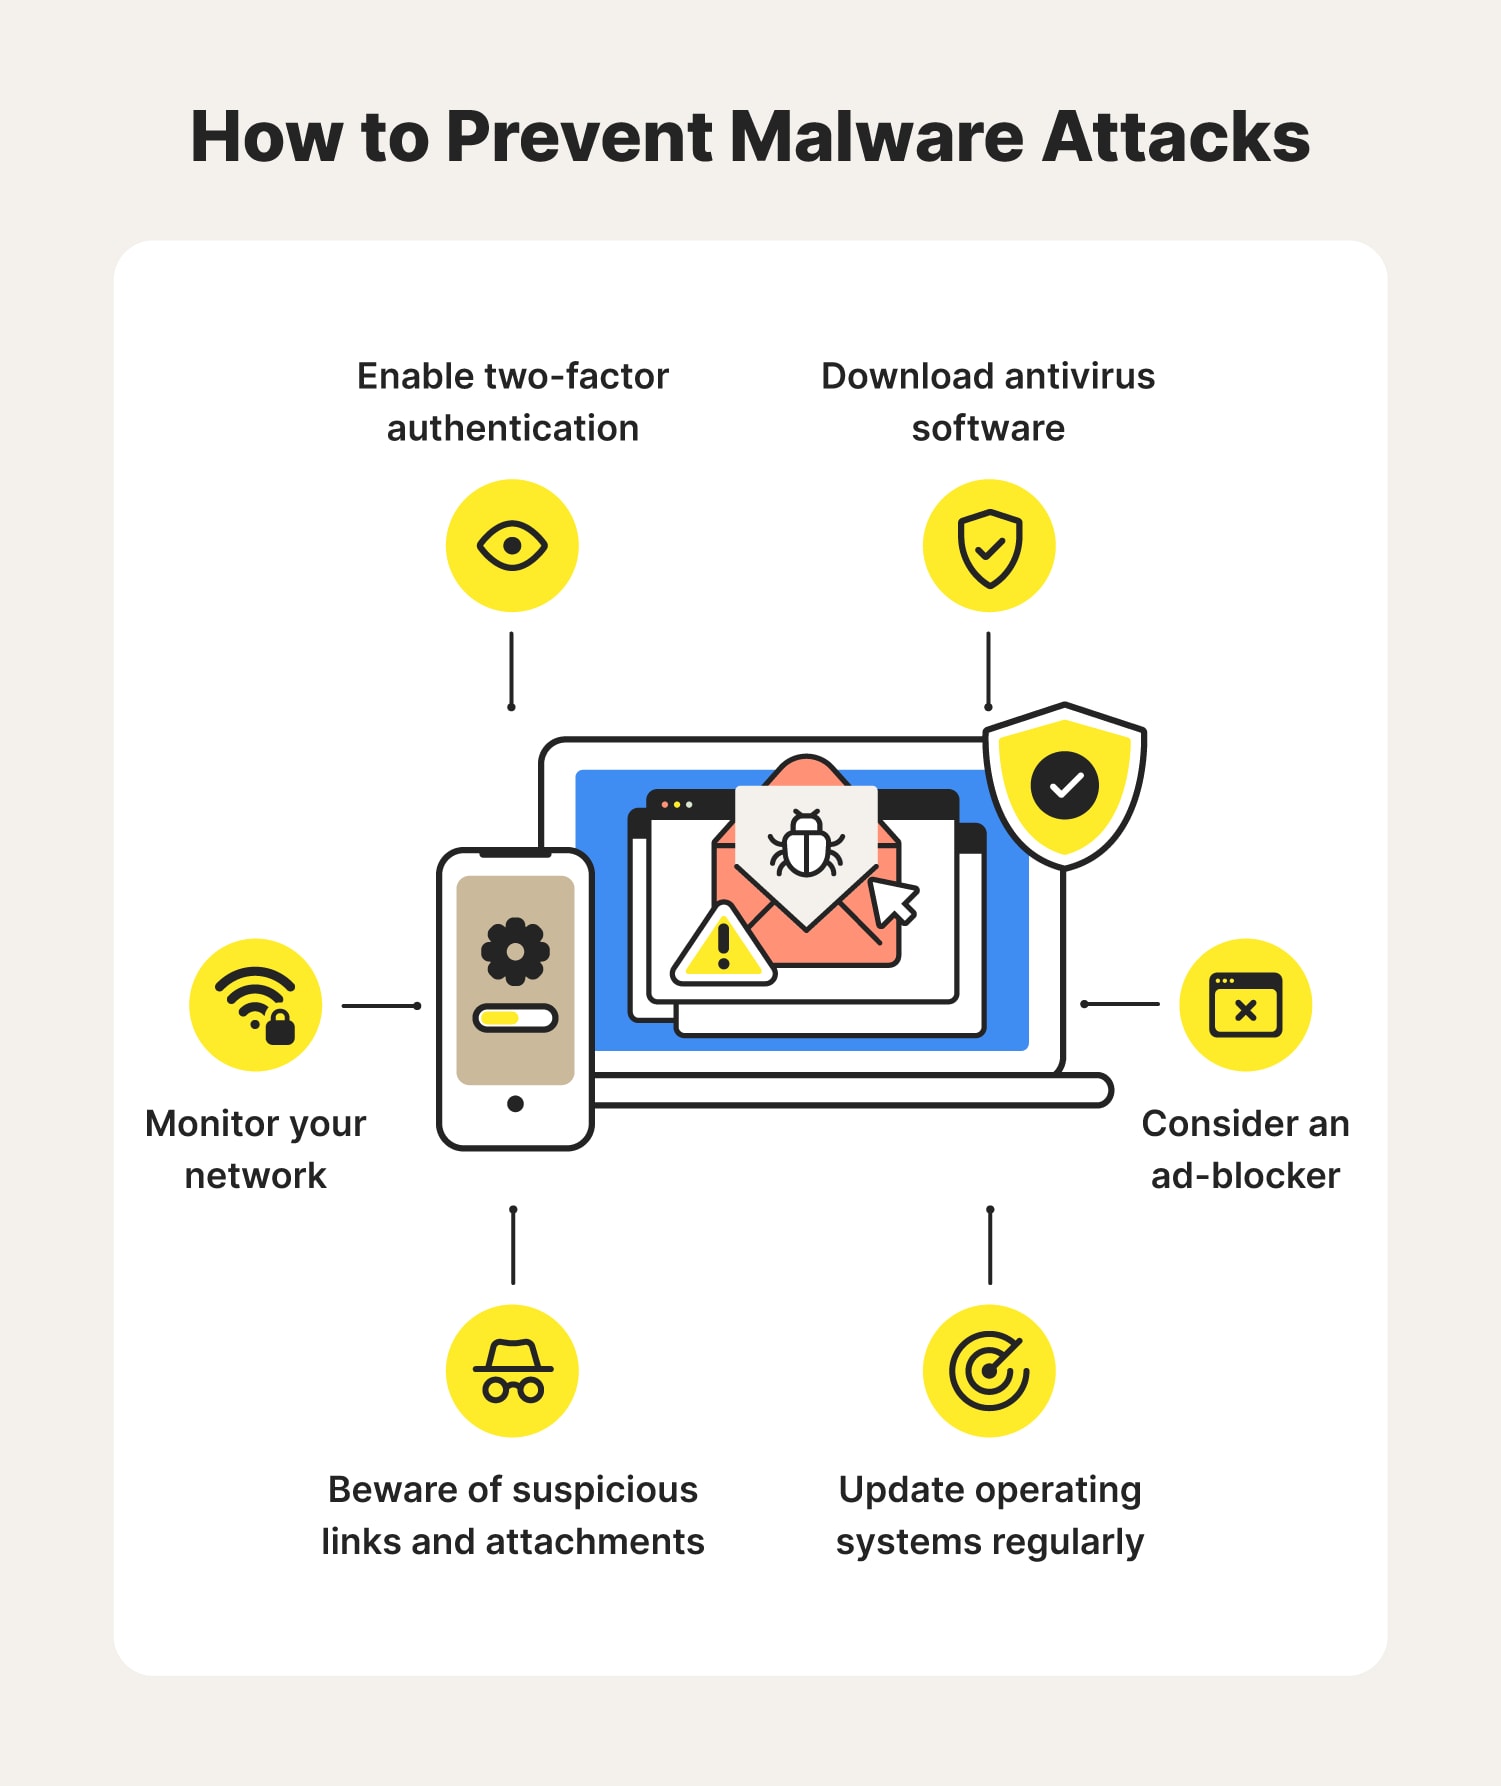 Seven illustrations depict malware protection tips that you can use to protect your network and devices. 